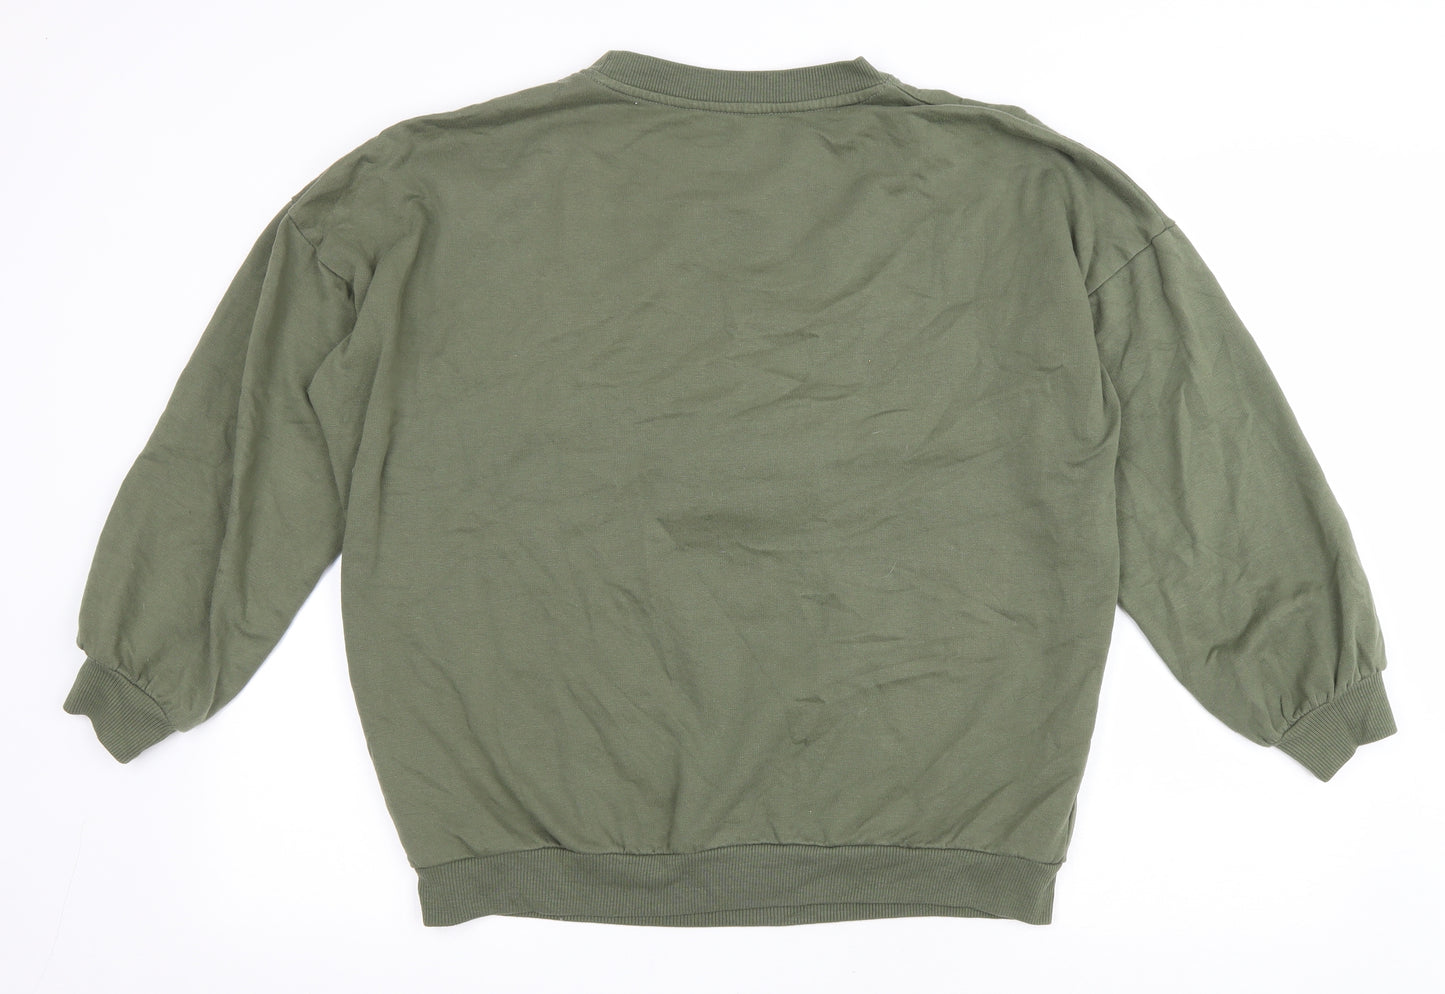 PEP&CO Mens Green Cotton Pullover Sweatshirt Size S - Whistler